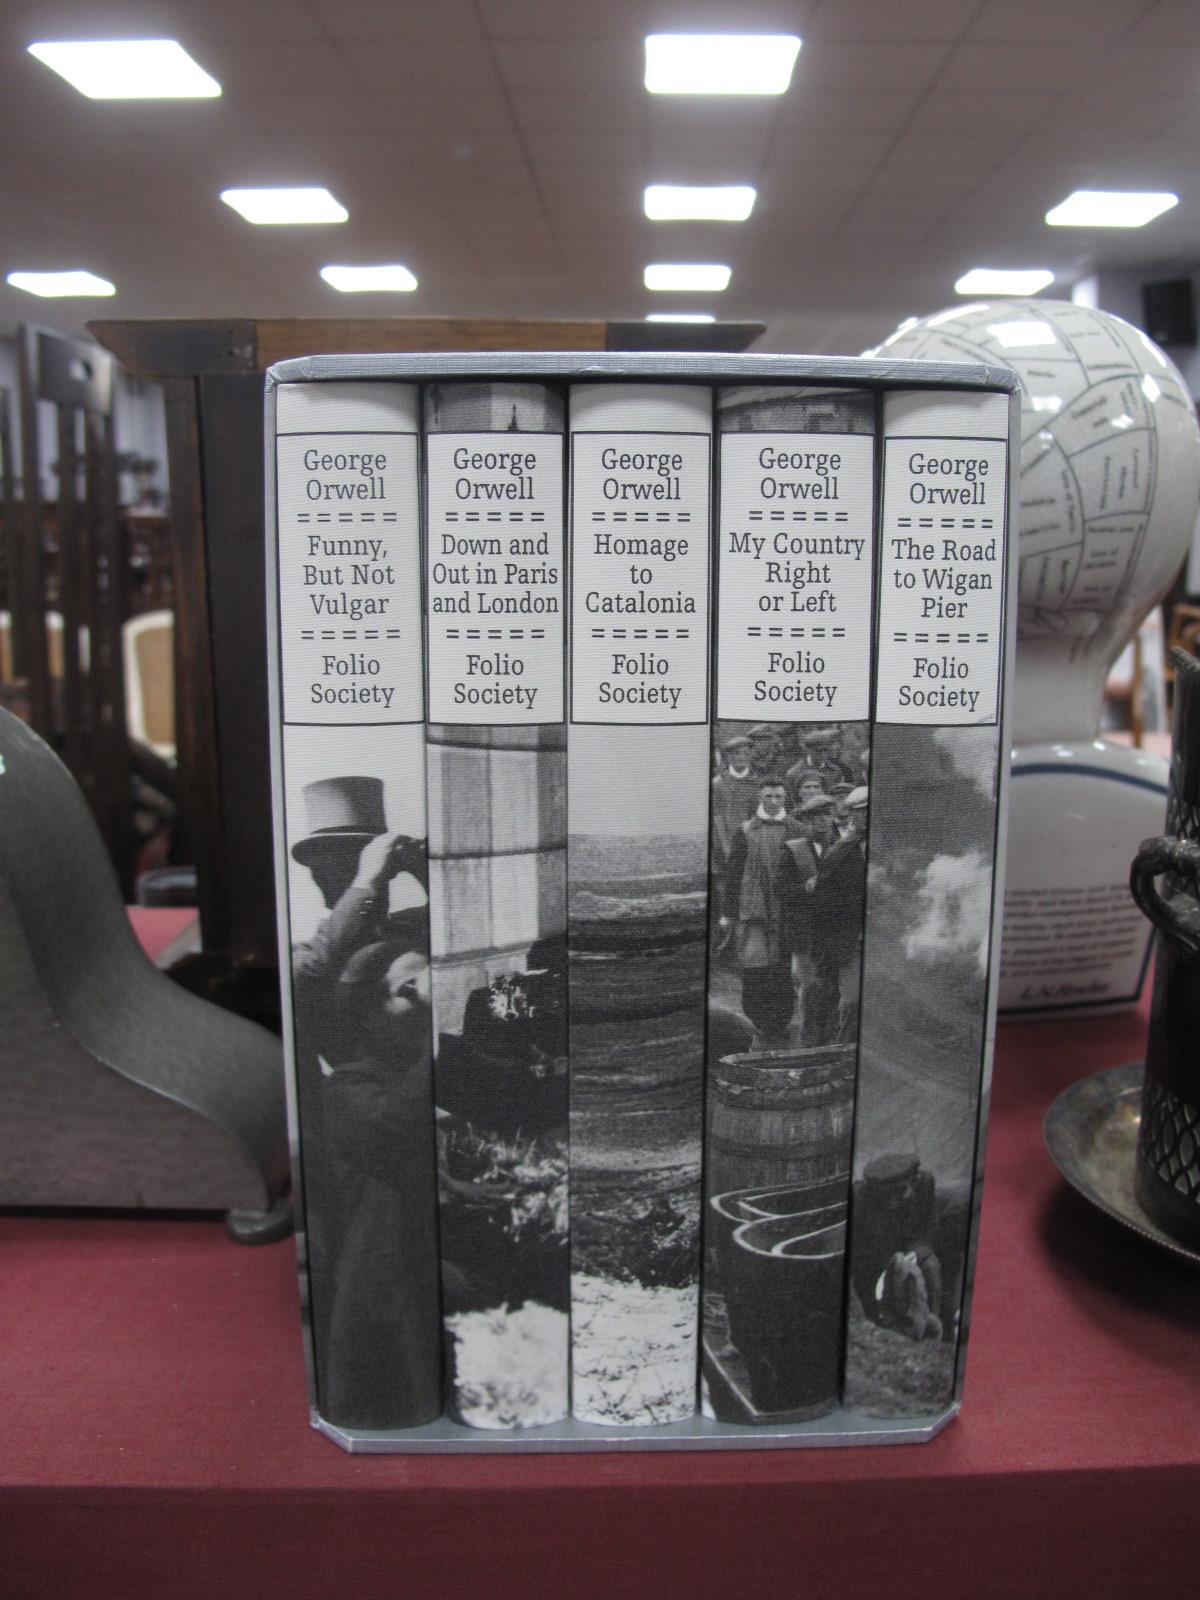 Folio Society: George Orwell, five editions including The Road to Wigan Pier, Down and Out in Paris,